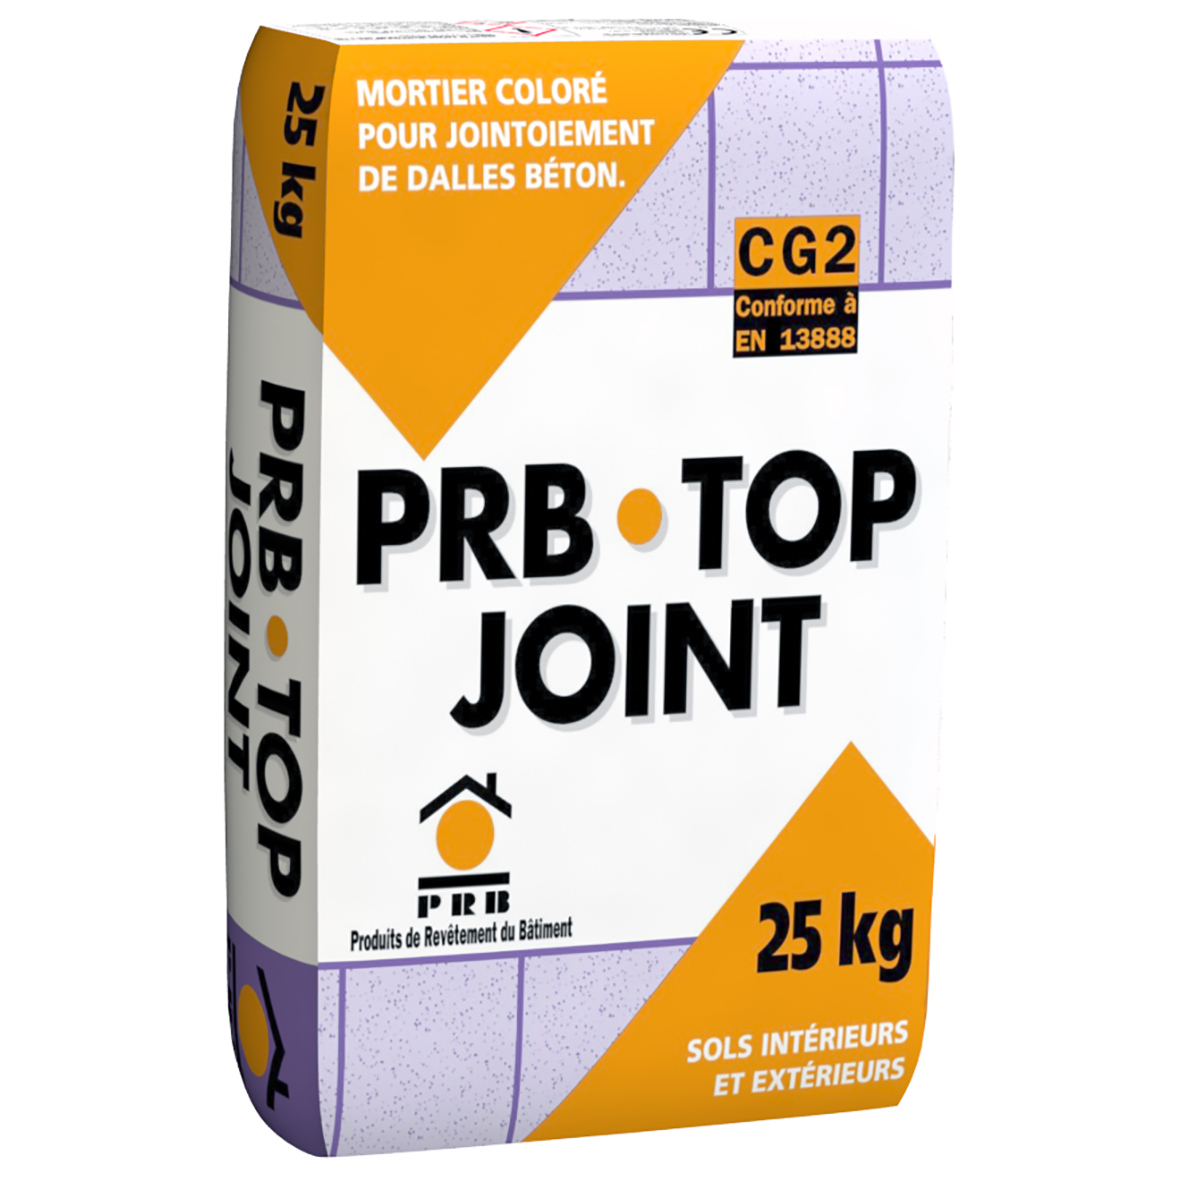 joint-dallage-prb-top-joint-25kg-sac-ton-pierre-0